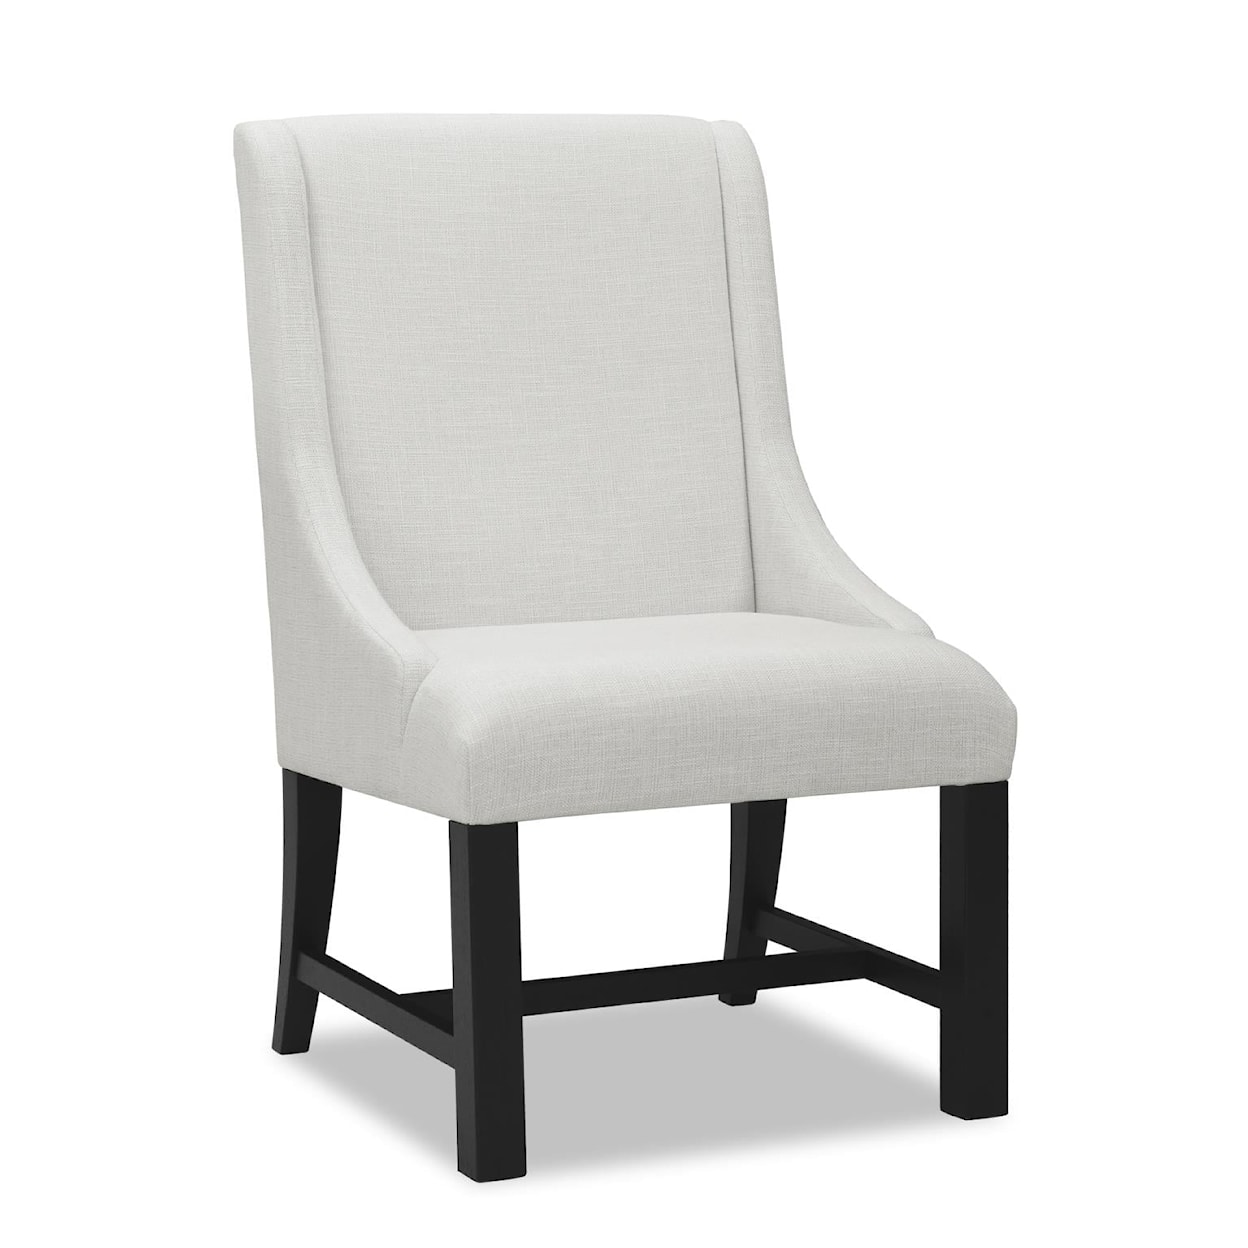 Trisha Yearwood Home Collection by Legacy Classic Today's Traditions Host Chair